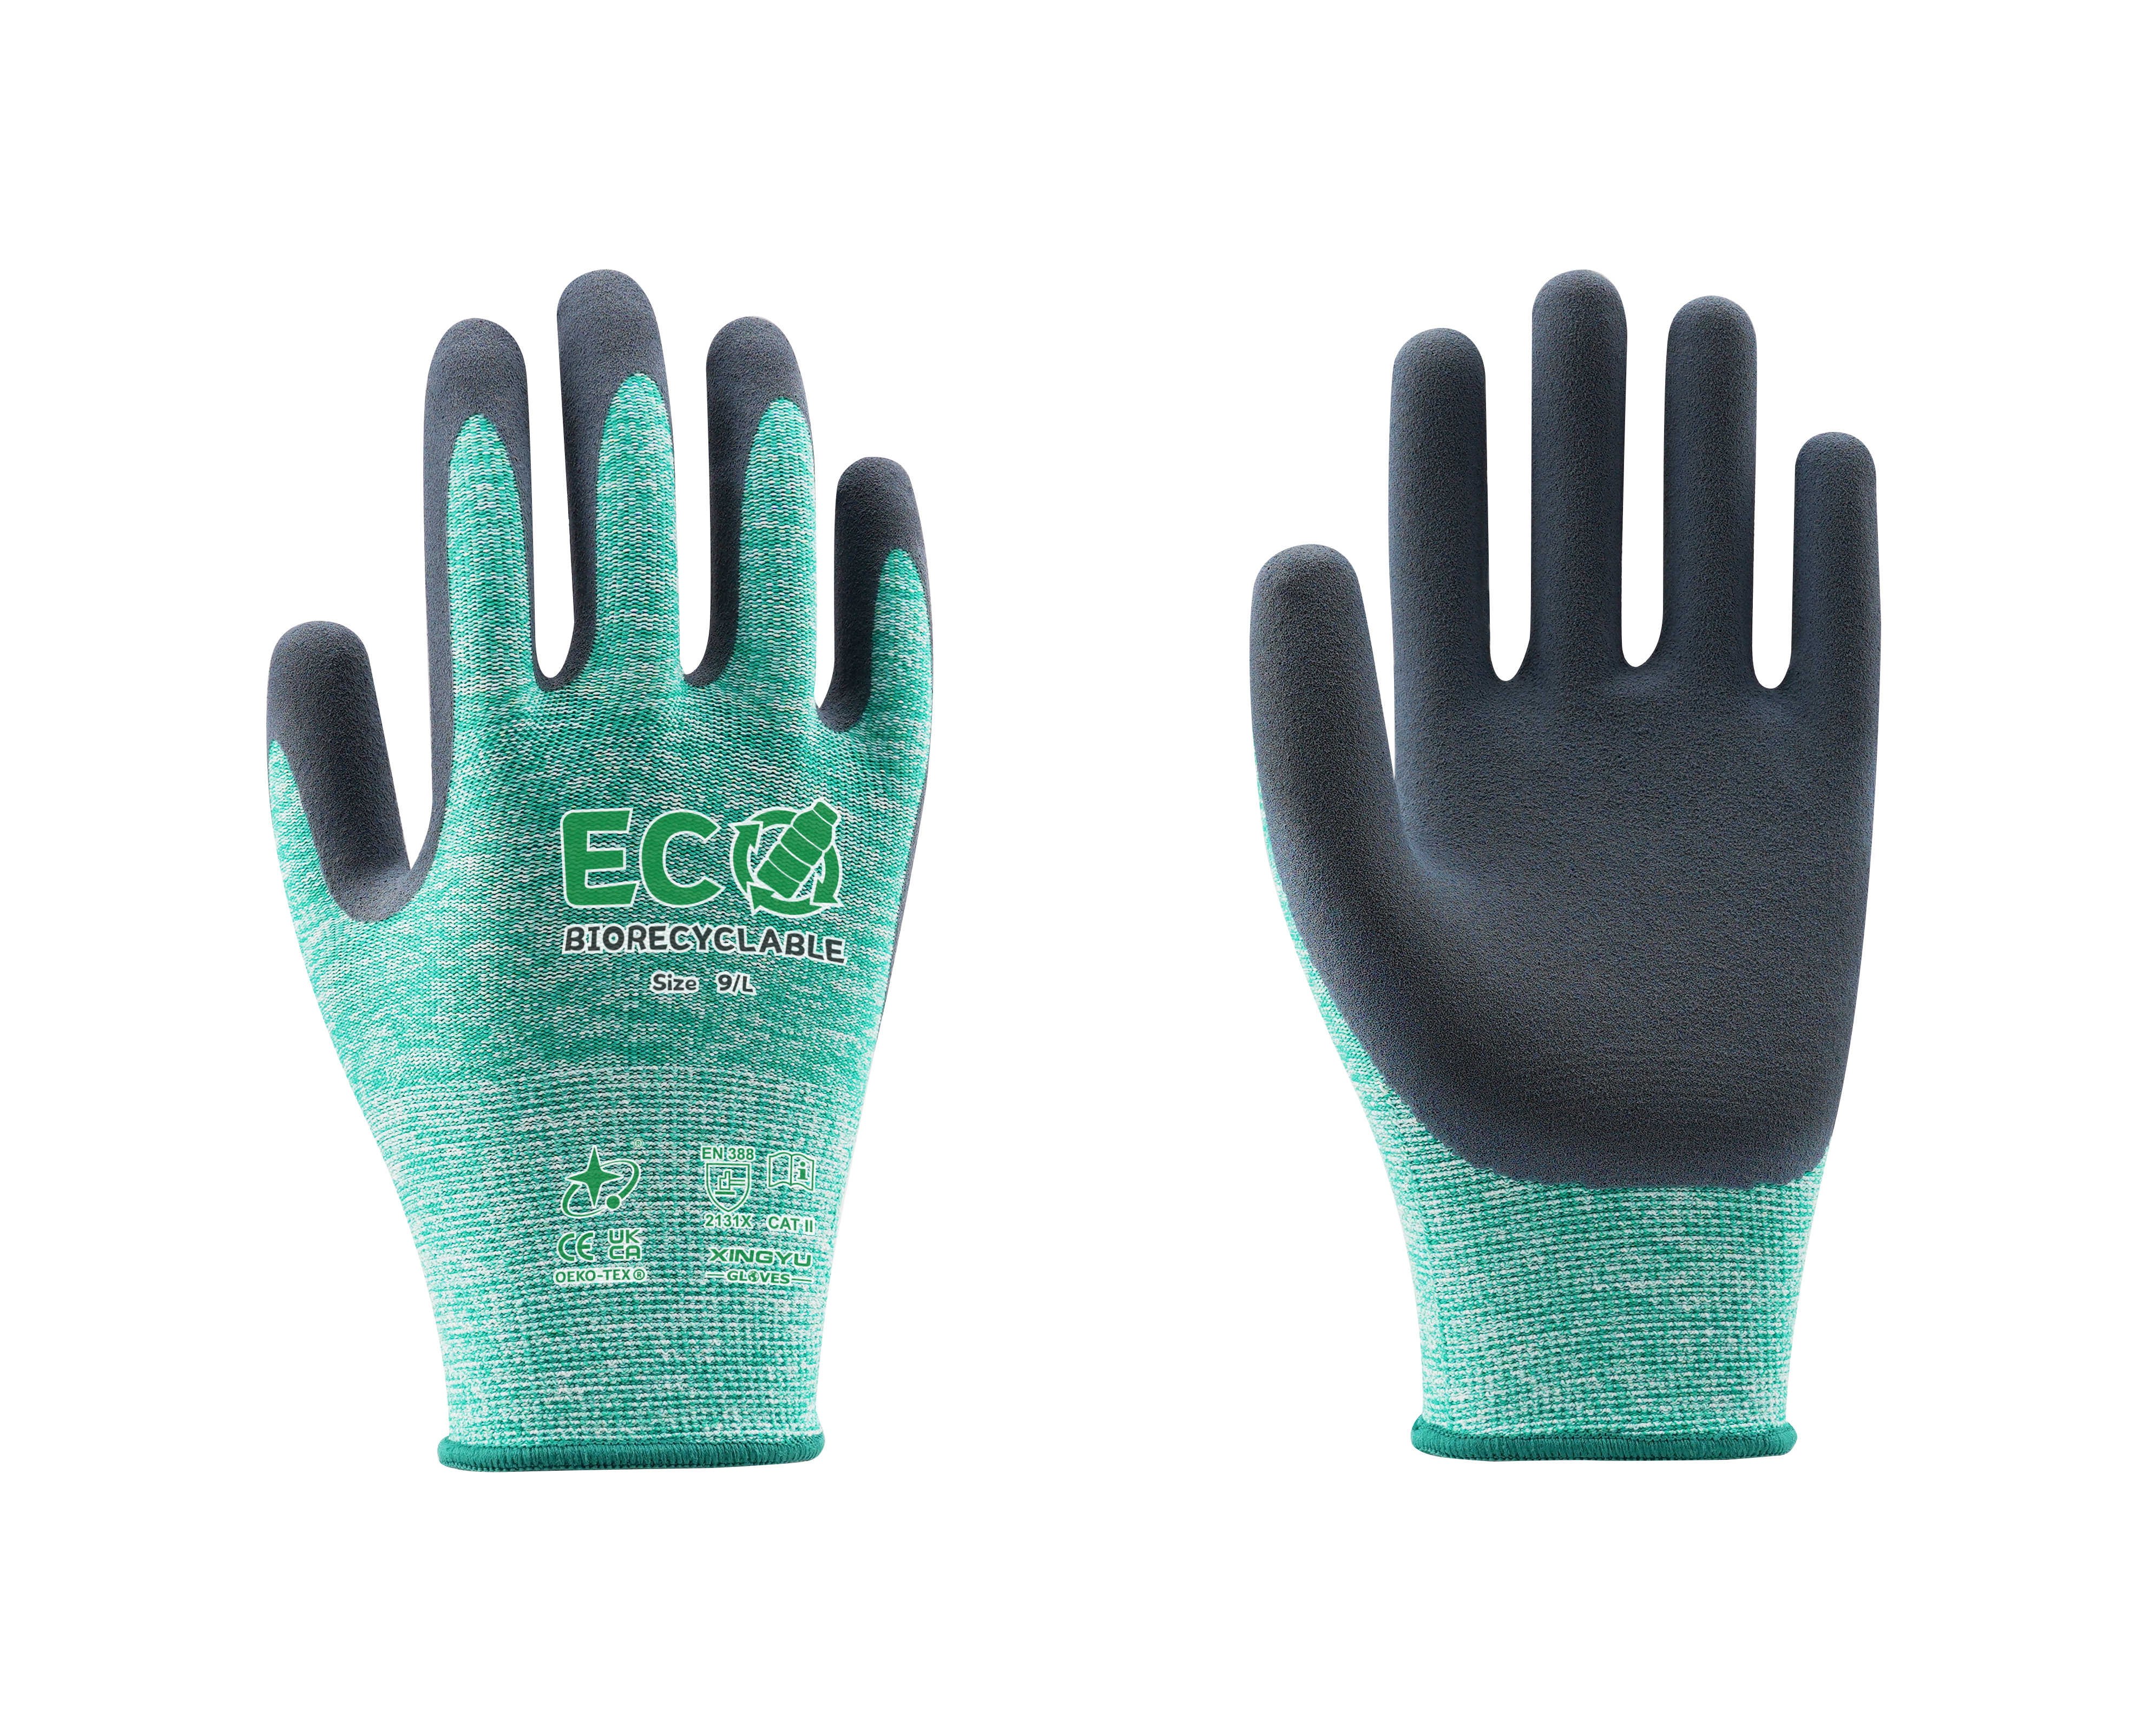 15 gauge PET Bottles Recycled Spandex nitrile palm coated Recycled gloves series 